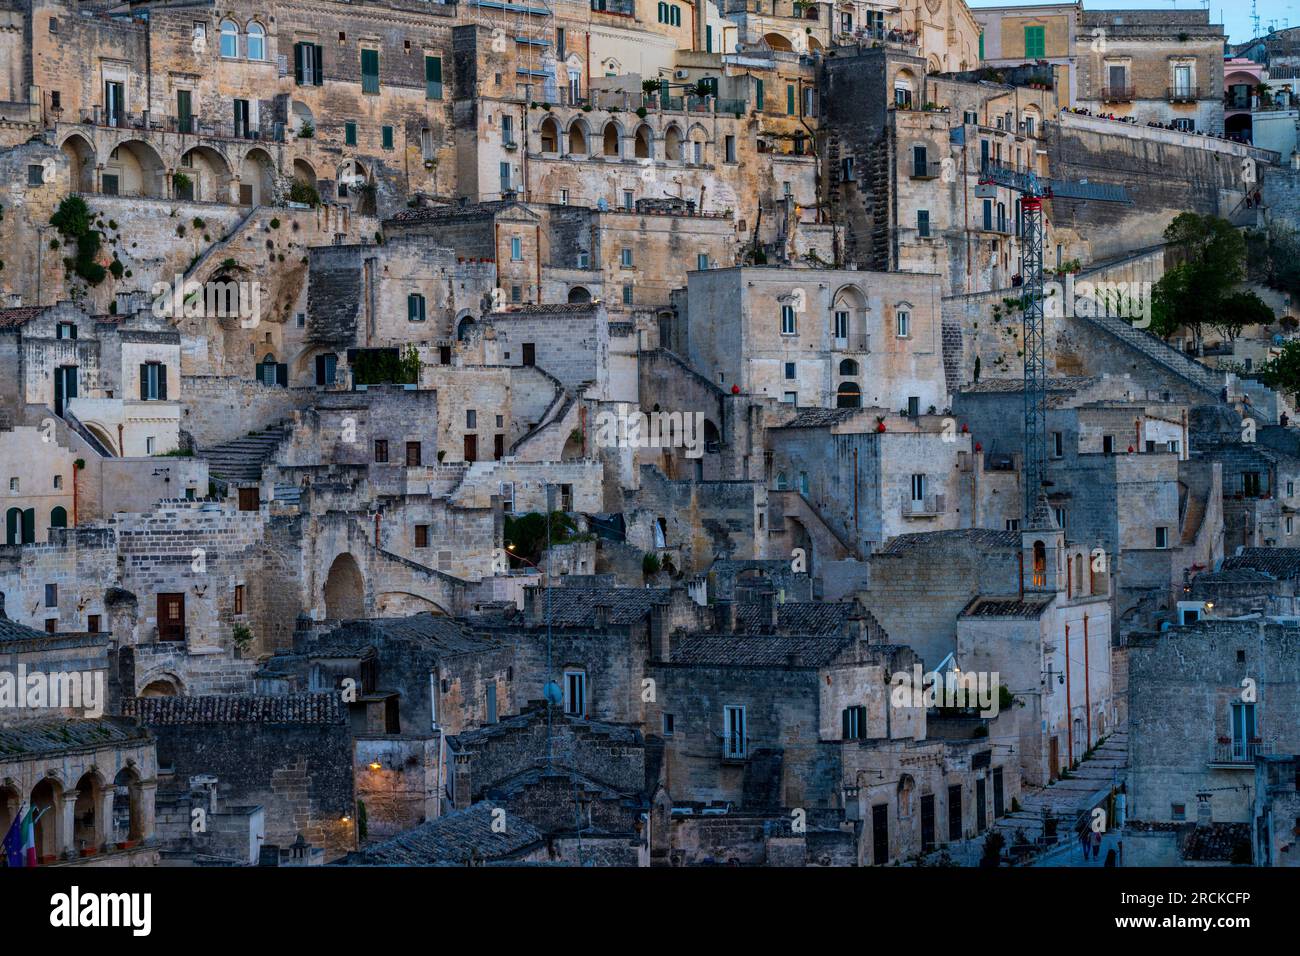 The medieval town of Matera in the Italian region of Basilicata. It is known for the Sassy, caves excavated on the sides of the hill. Stock Photo